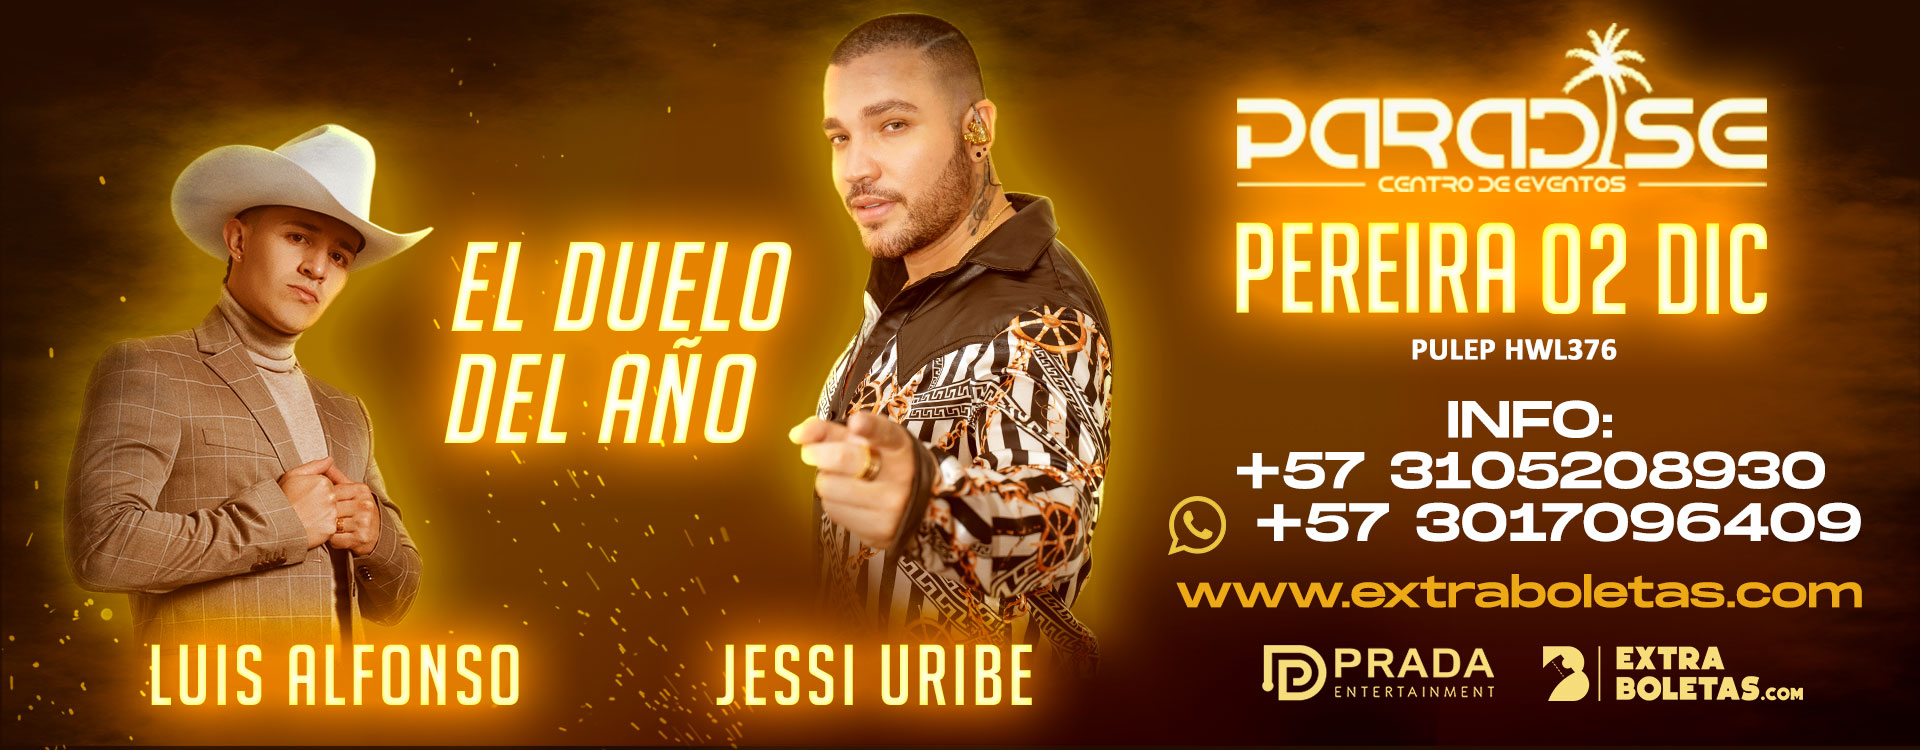 DUELO_BANNER-1920x750-px (1)